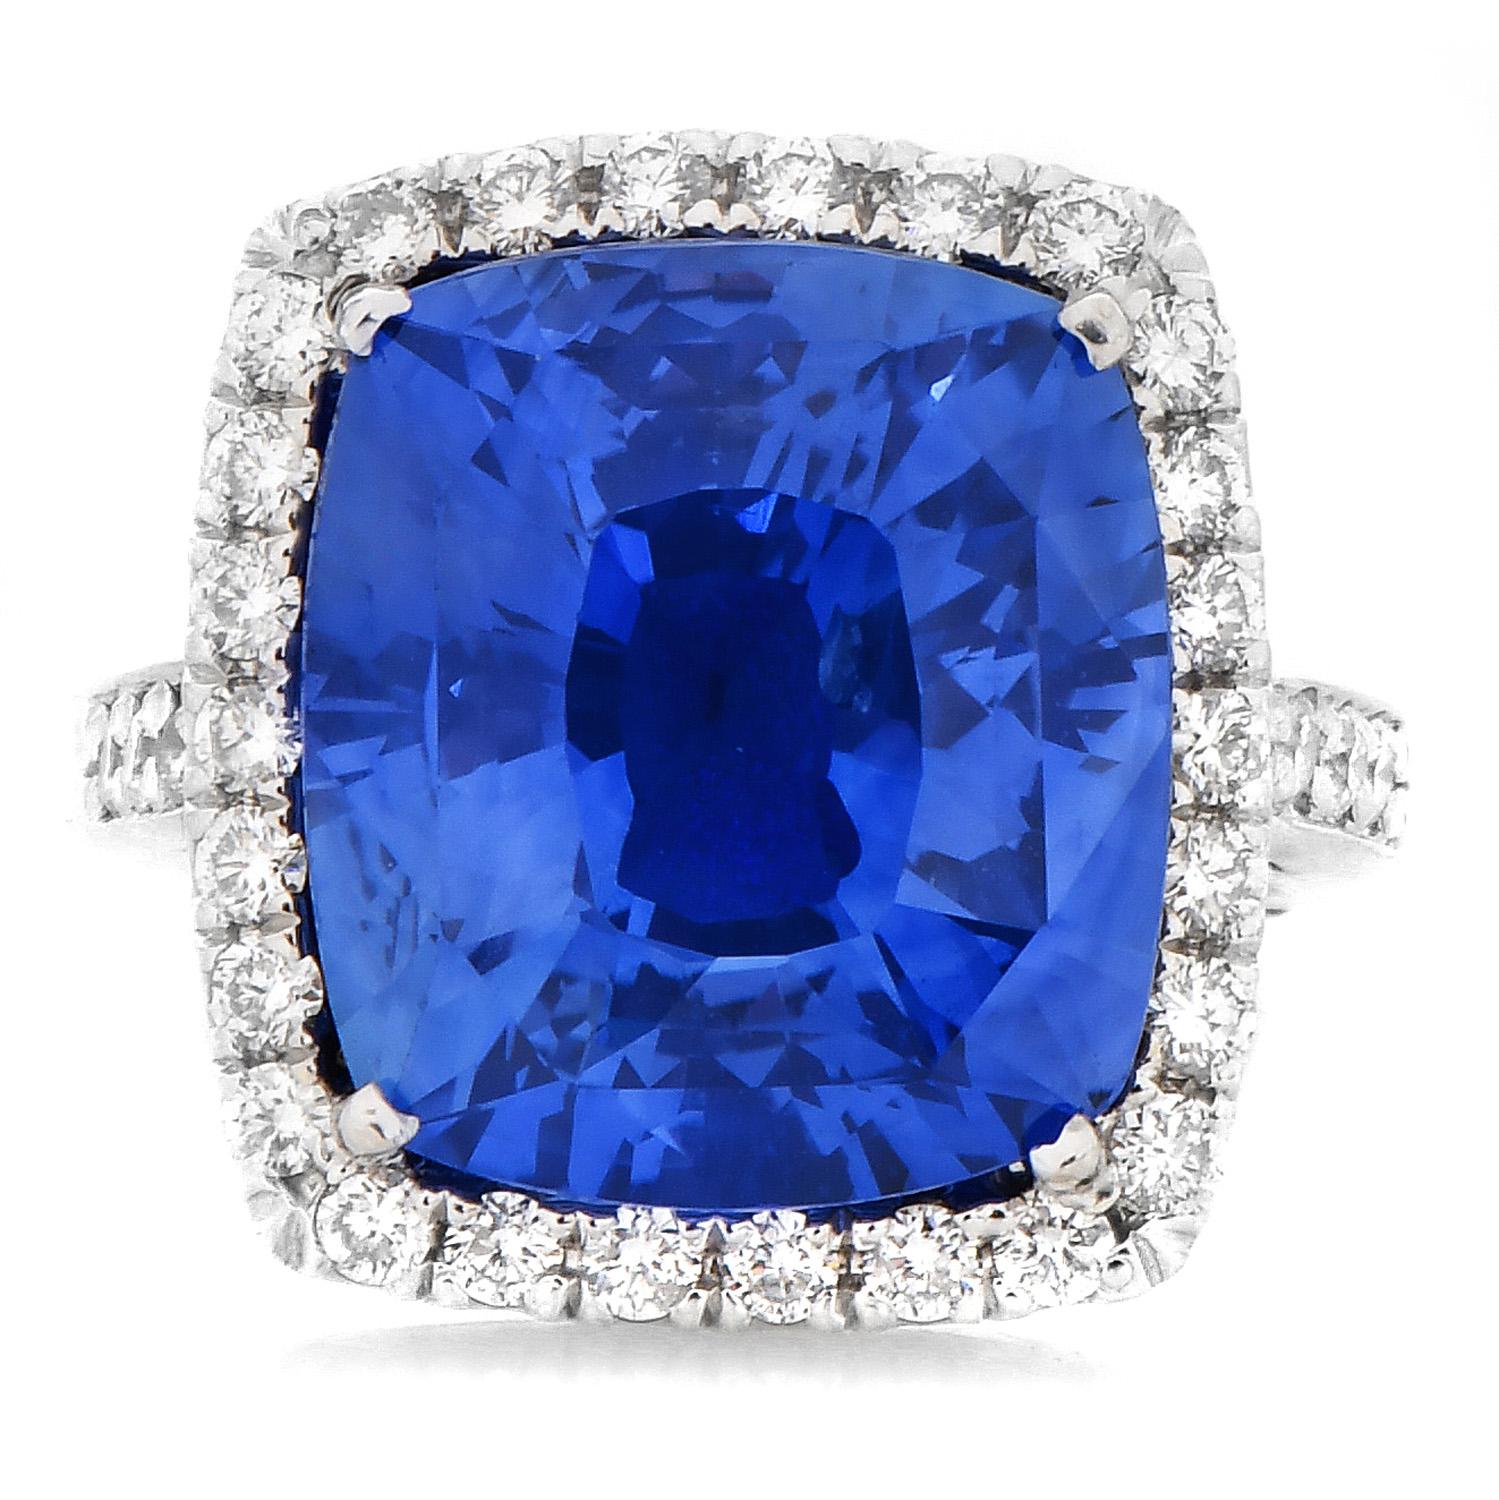  Certified 17.26ct Ceylon Blue Cushion Sapphire Diamond 18K Cocktail Ring In Excellent Condition For Sale In Miami, FL